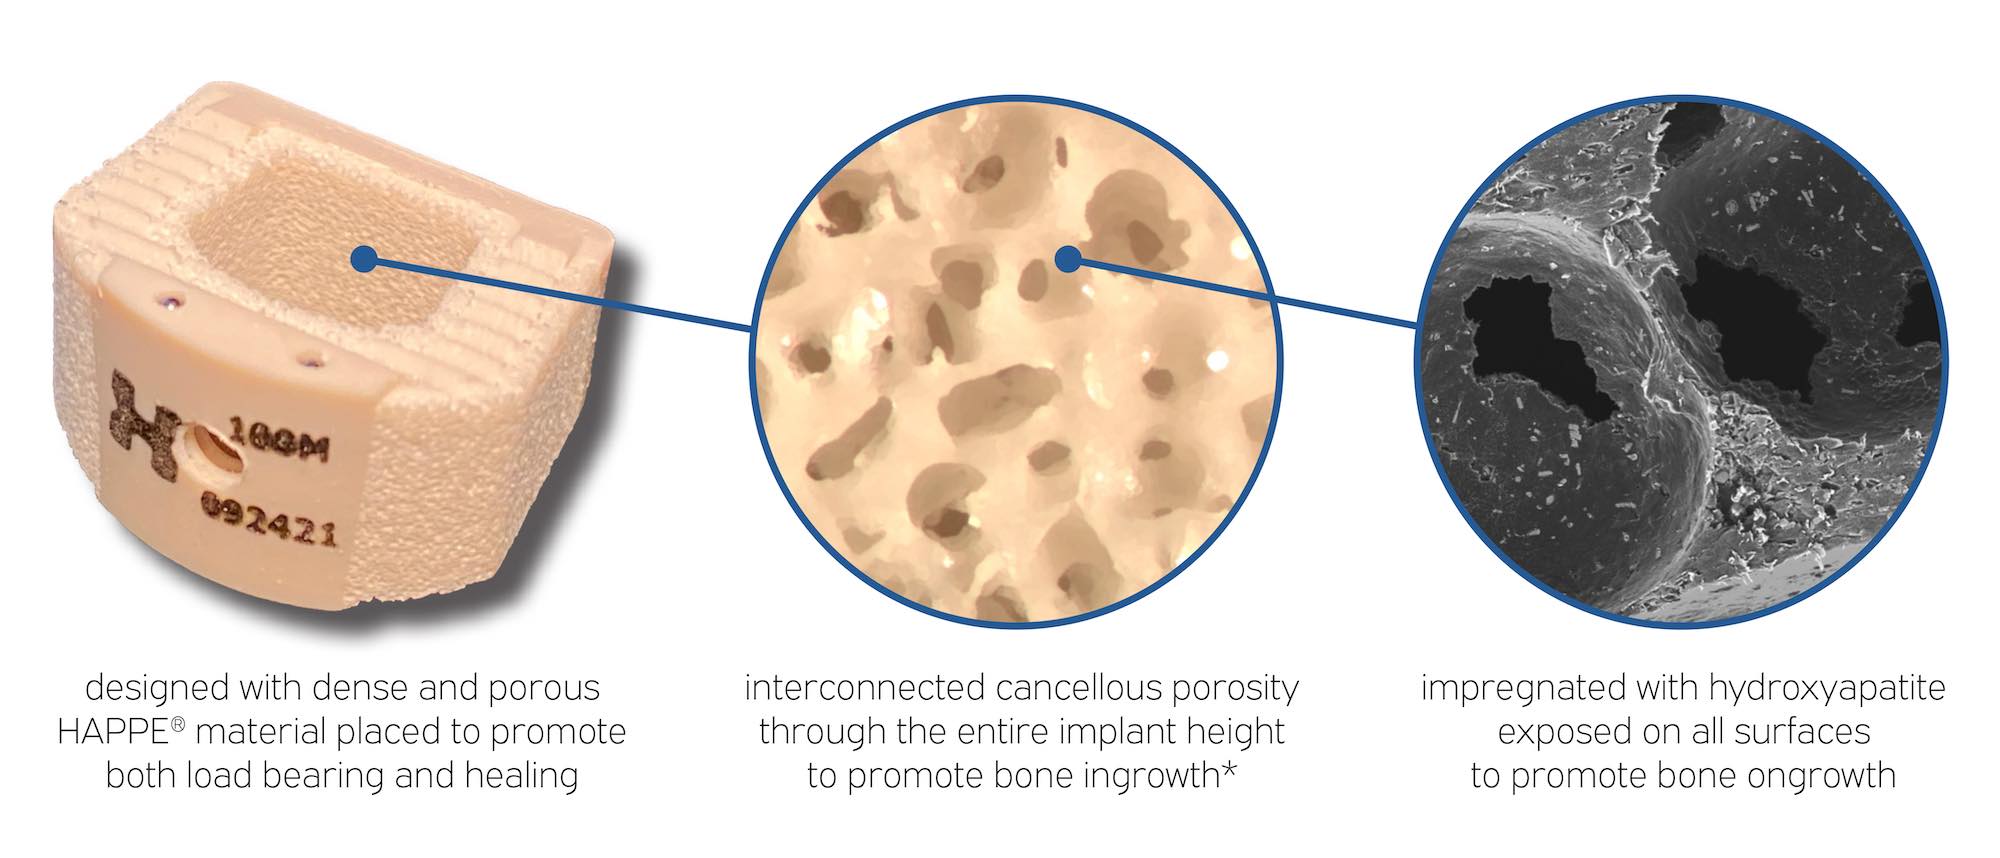 The benefits of HAPPE technology include dense and porous material placed to promote both load bearing and healing. Interconnected cancellous porosity through the entire implant height to promote bone ingrowth. Impregnated with hydroxyapatite exposed on all surfaces to promote bone ongrowth.